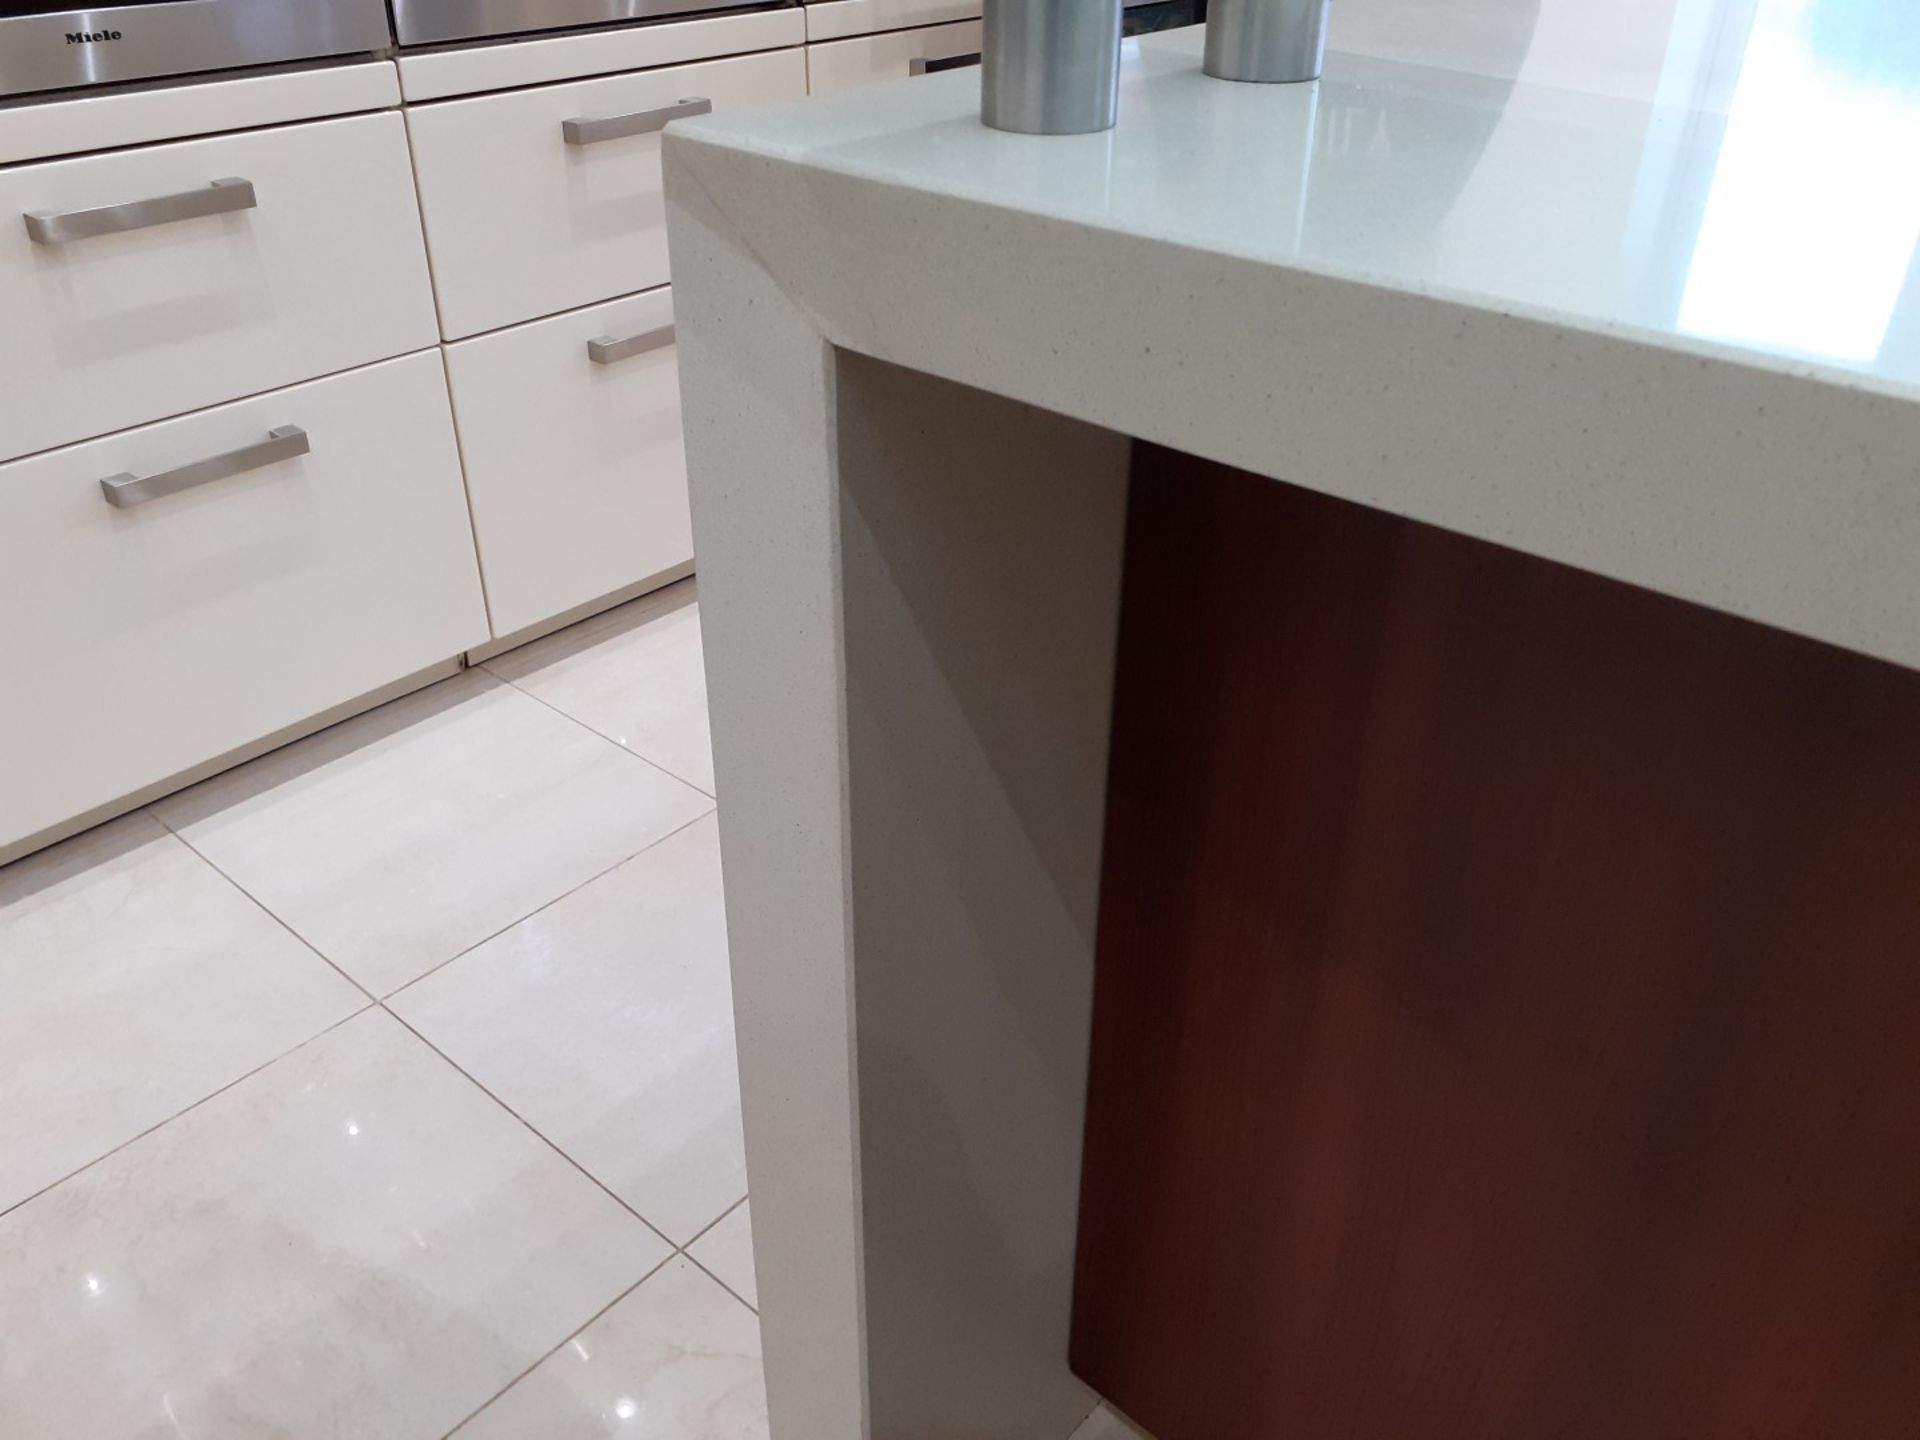 1 x ALNO Fitted Gloss White Kitchen With Integrated Miele Appliances, Silestone Worktops And A - Image 21 of 86